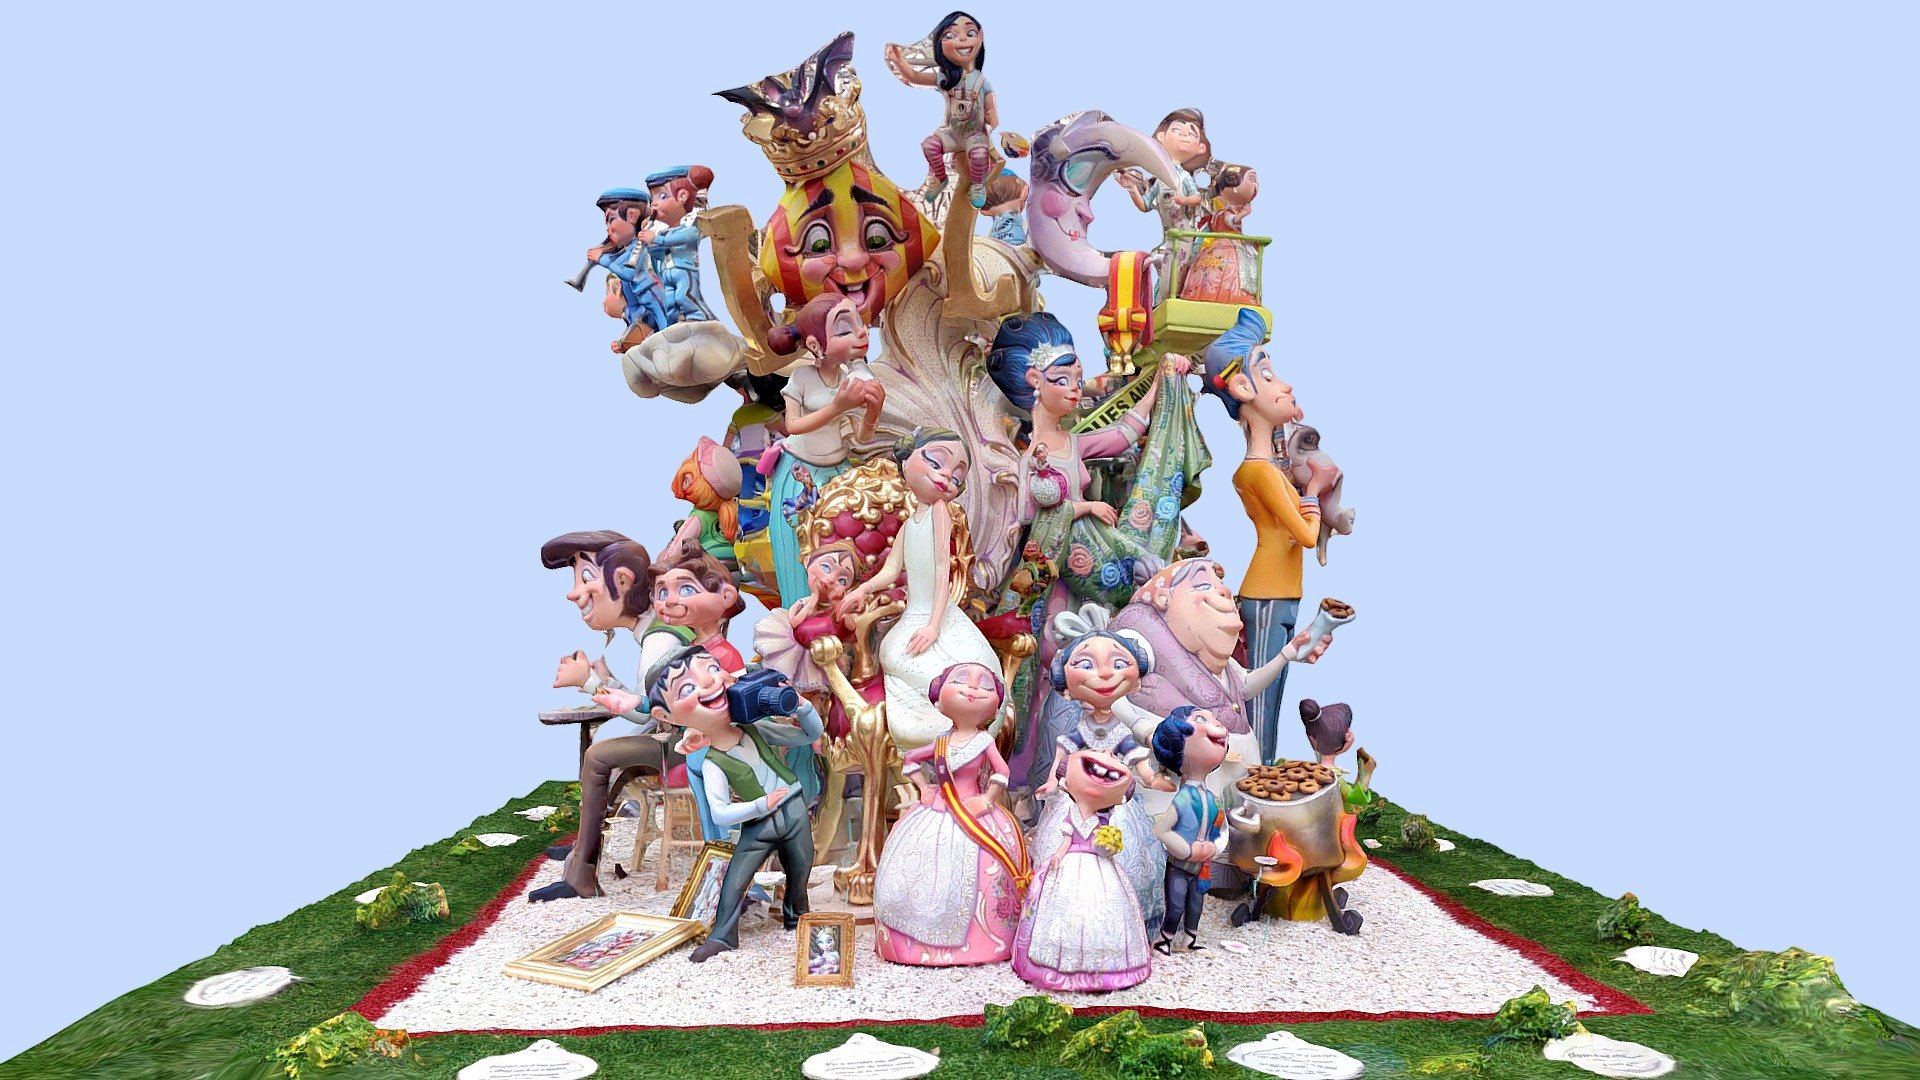 Fallas is a traditional celebration held annually in commemoration of Saint Joseph in the city of Valencia, Spain. The term refers to the celebration but also to the ephemeral monuments that are burnt the last night of the celebration. 
This Falla shows all the people that take part on the celebration, from the falleras, to the artists and firemen.
Generated by 188 pictures on a OnePlus 8

Created with Polycam - Falla infantil Almirante Cadarso 2022 - 3D model by Aupuma 3d model